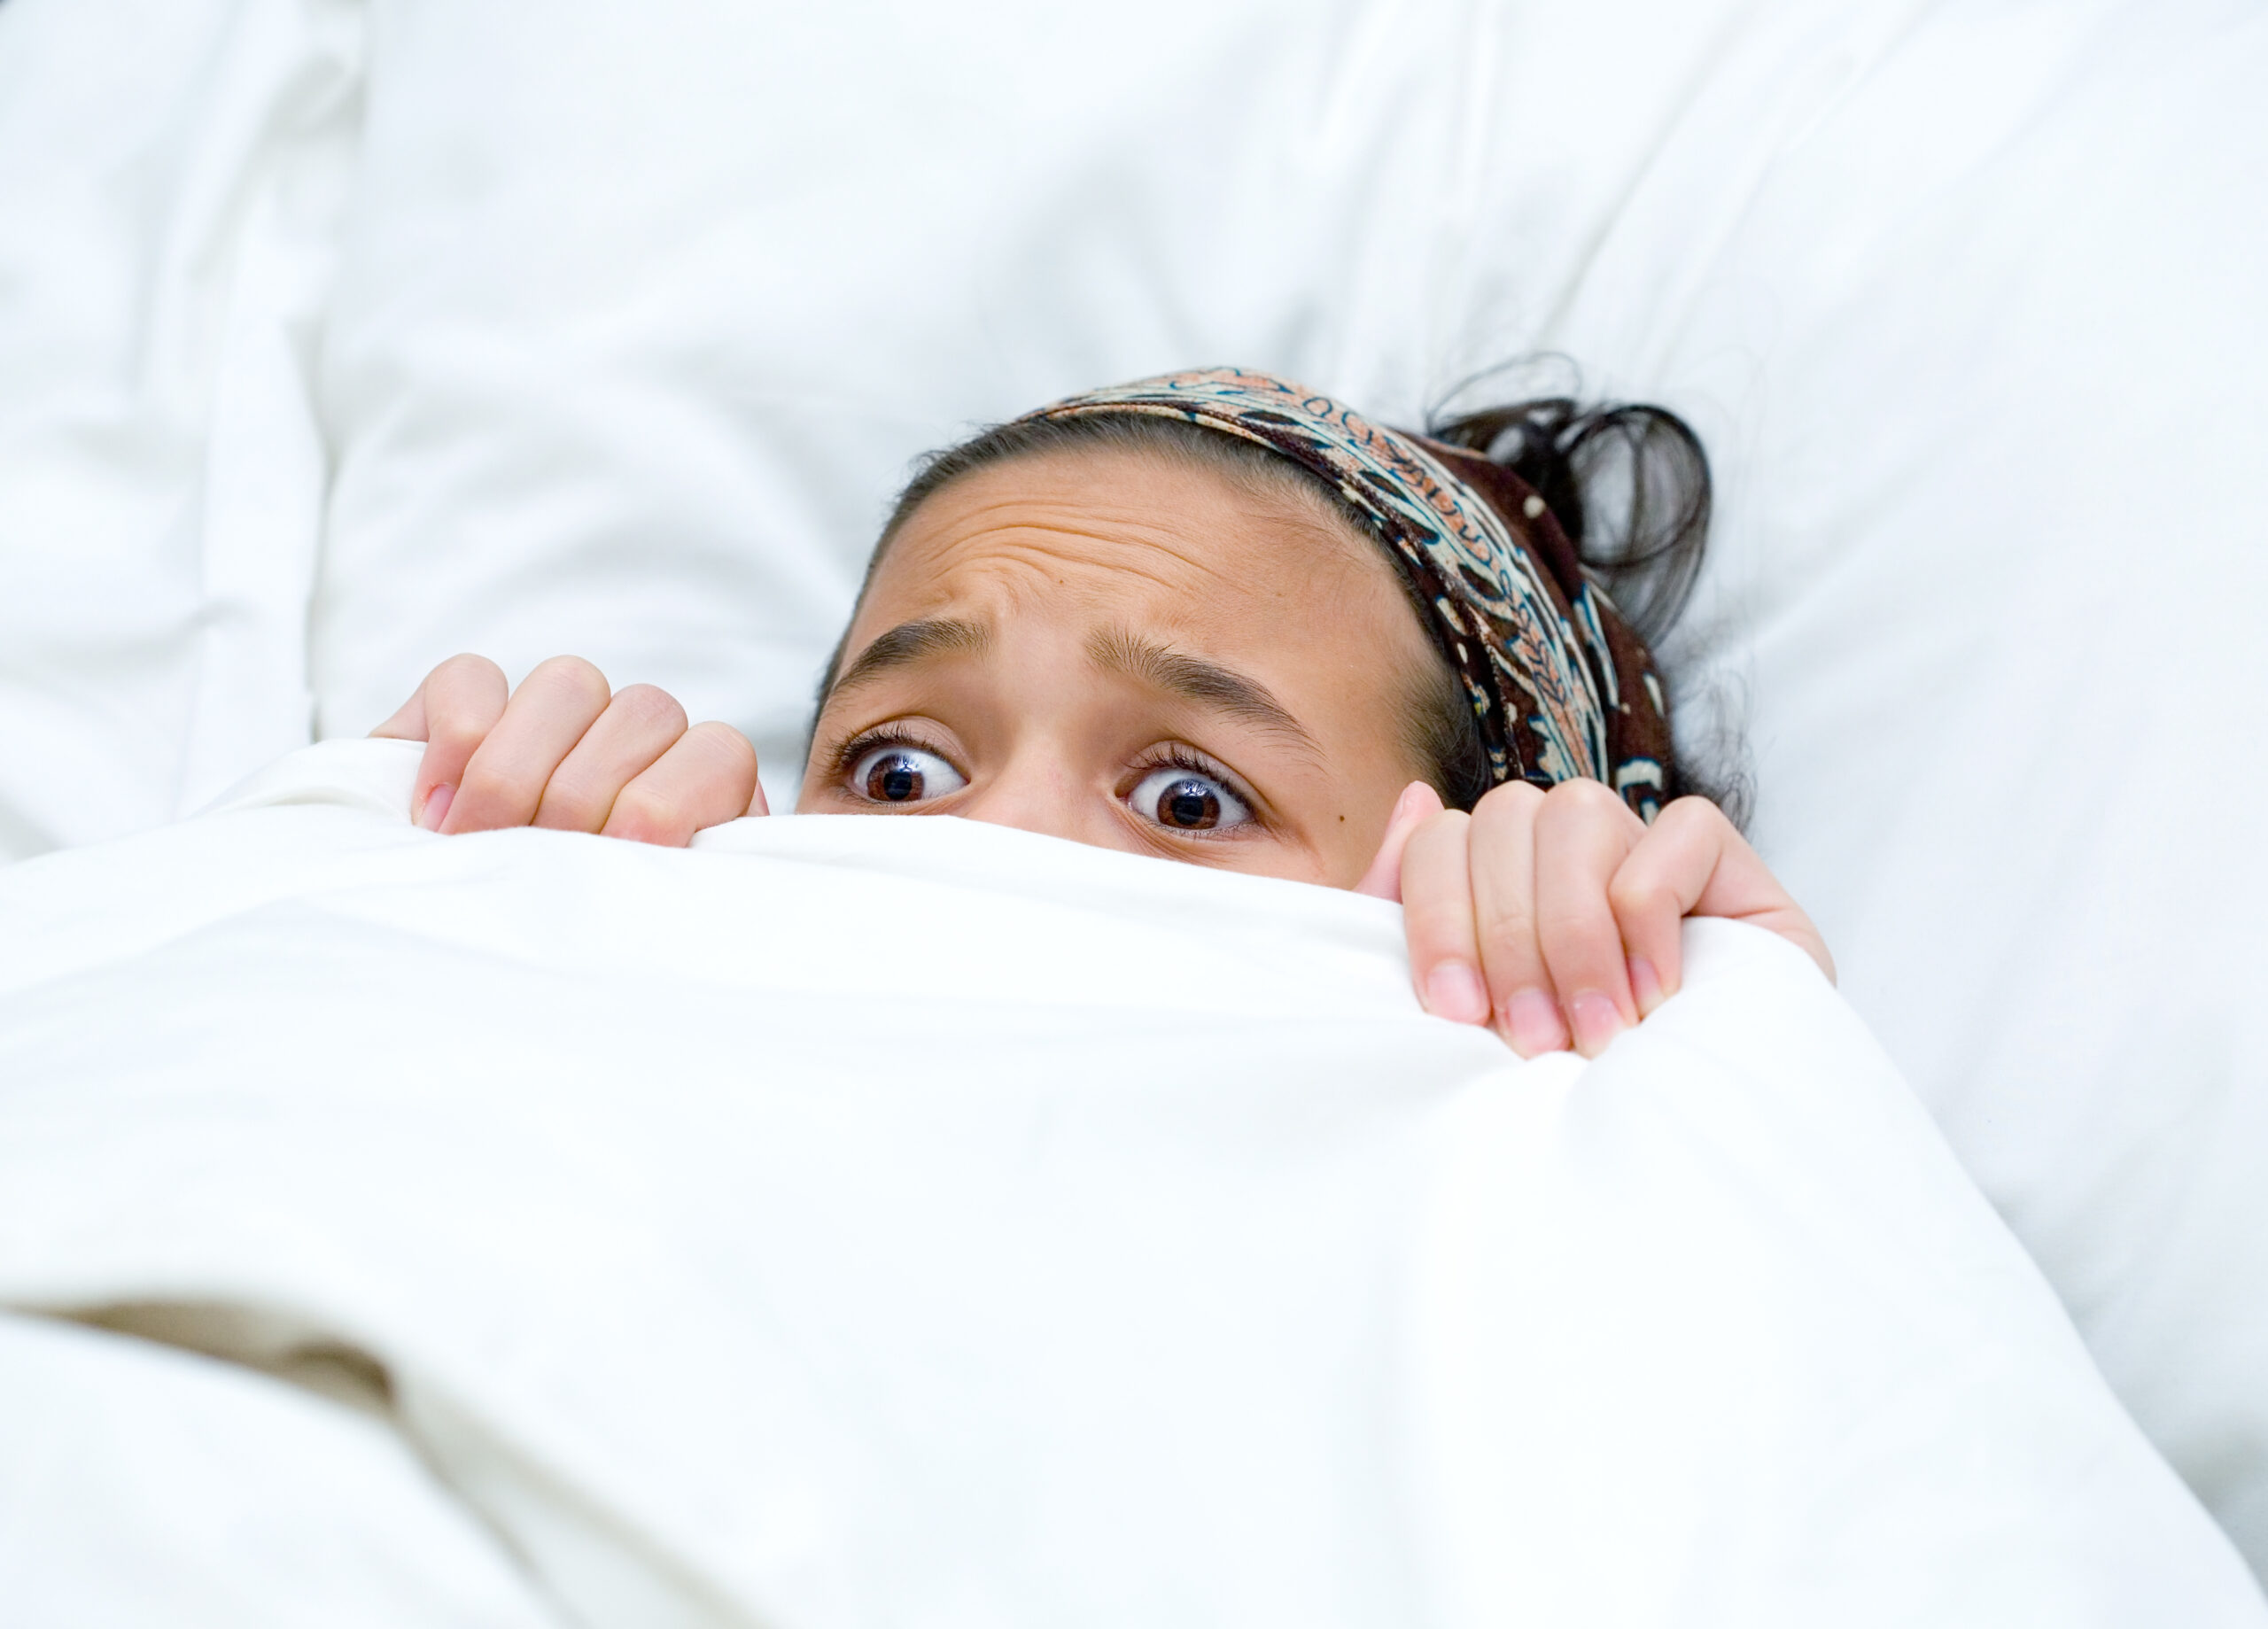 What Can You Do About Bedwetting?